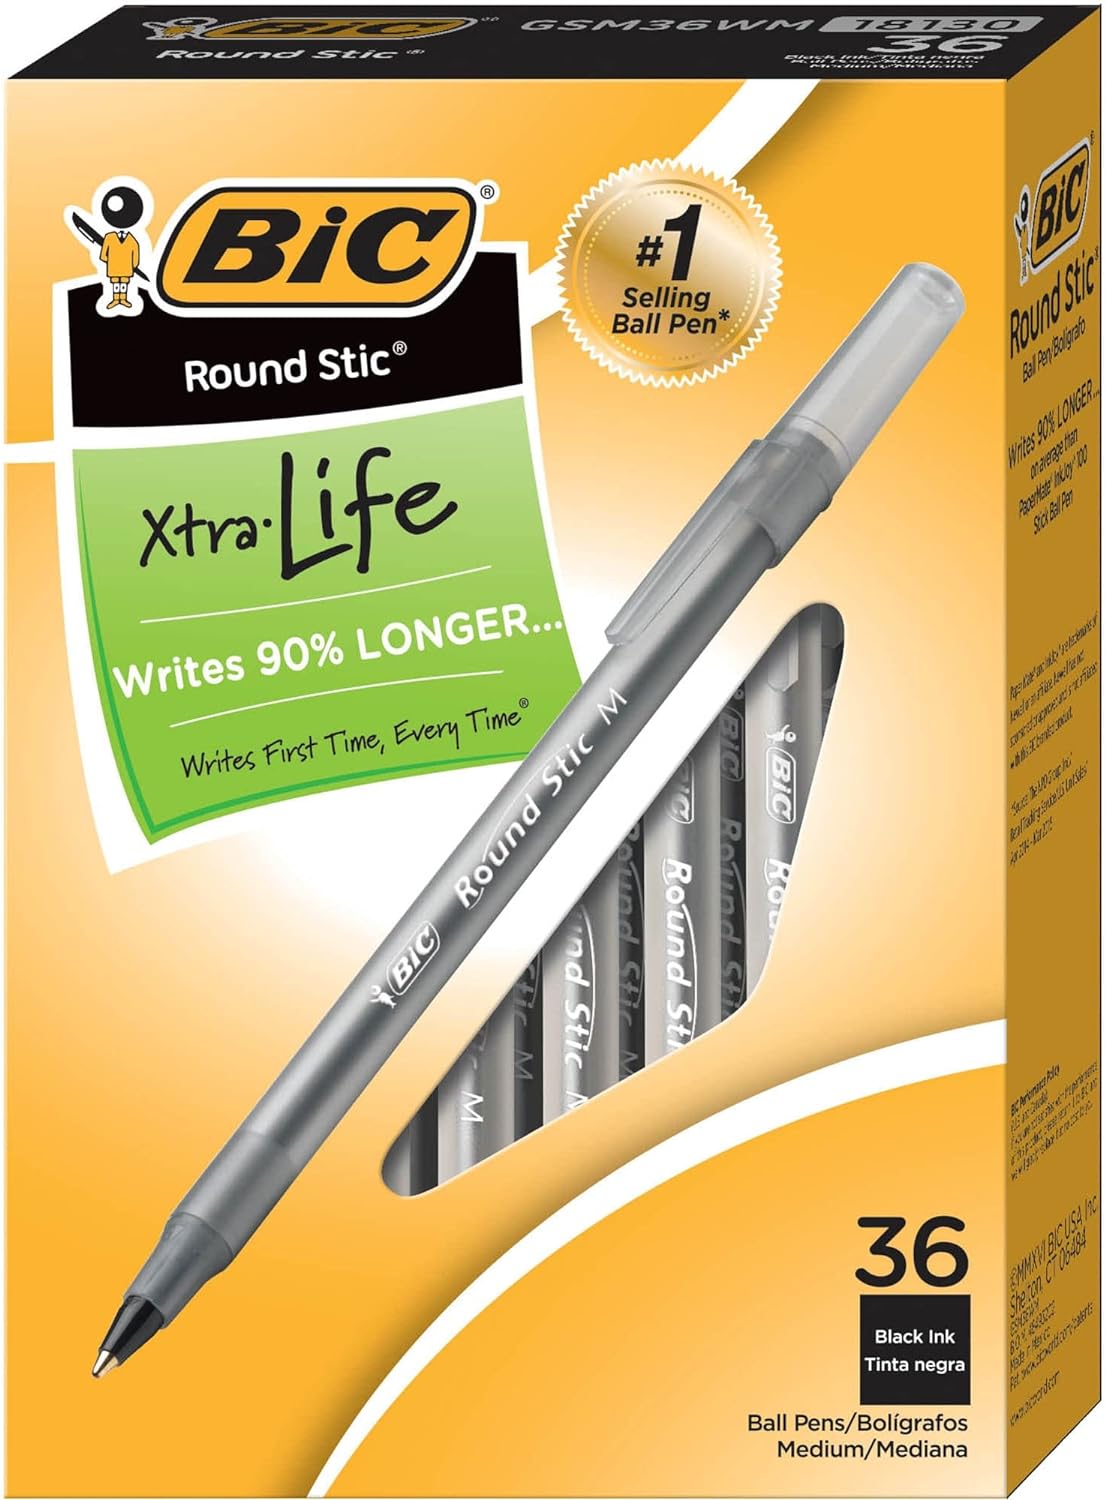 BIC Round Stic Xtra Life Ball Point Pen, Black, 36 Pack